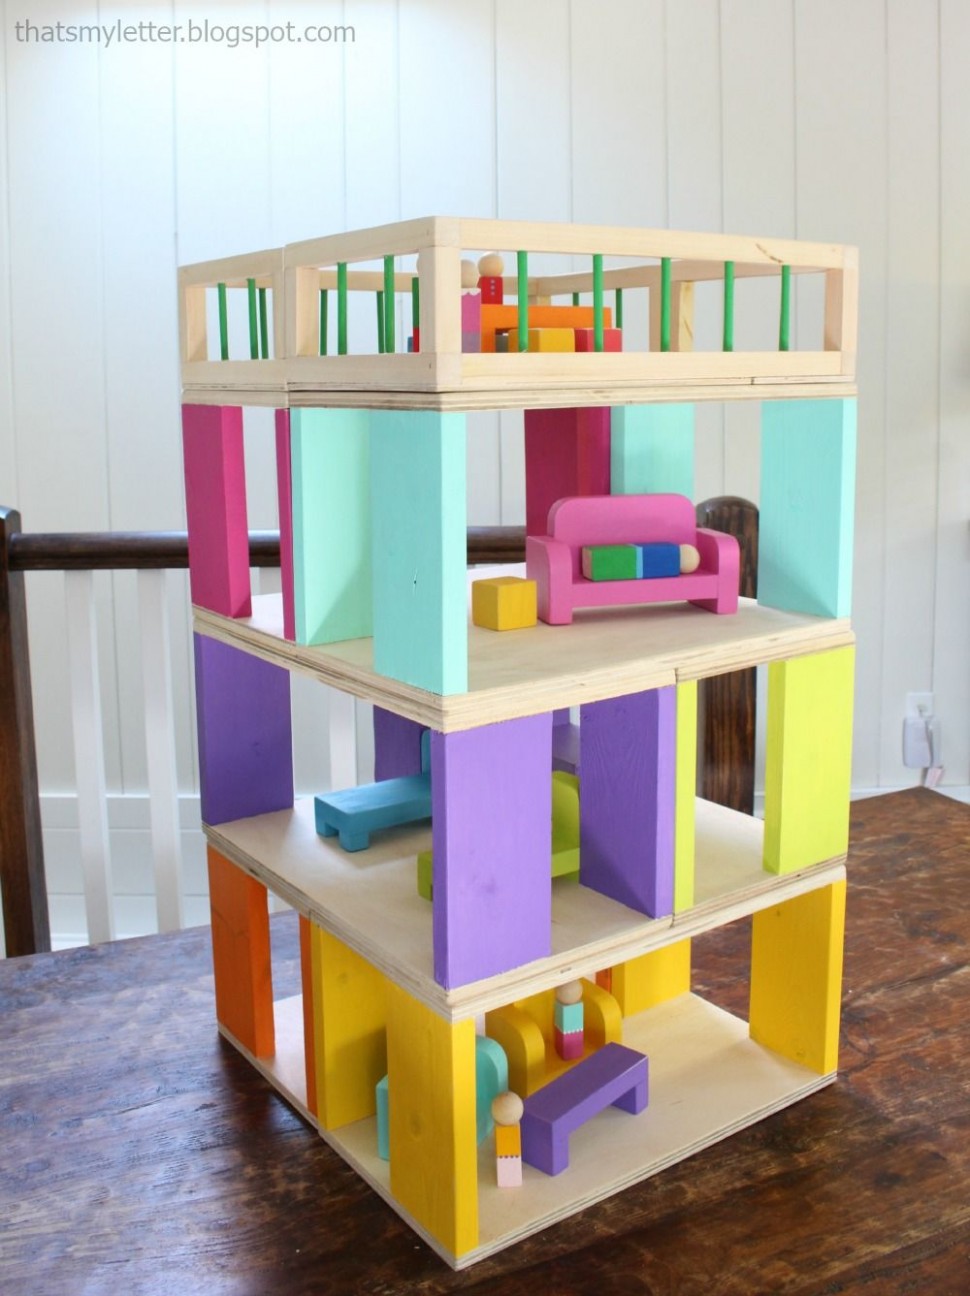 Modular Stackable Dollhouse Free And Easy Diy Project And Doll ..